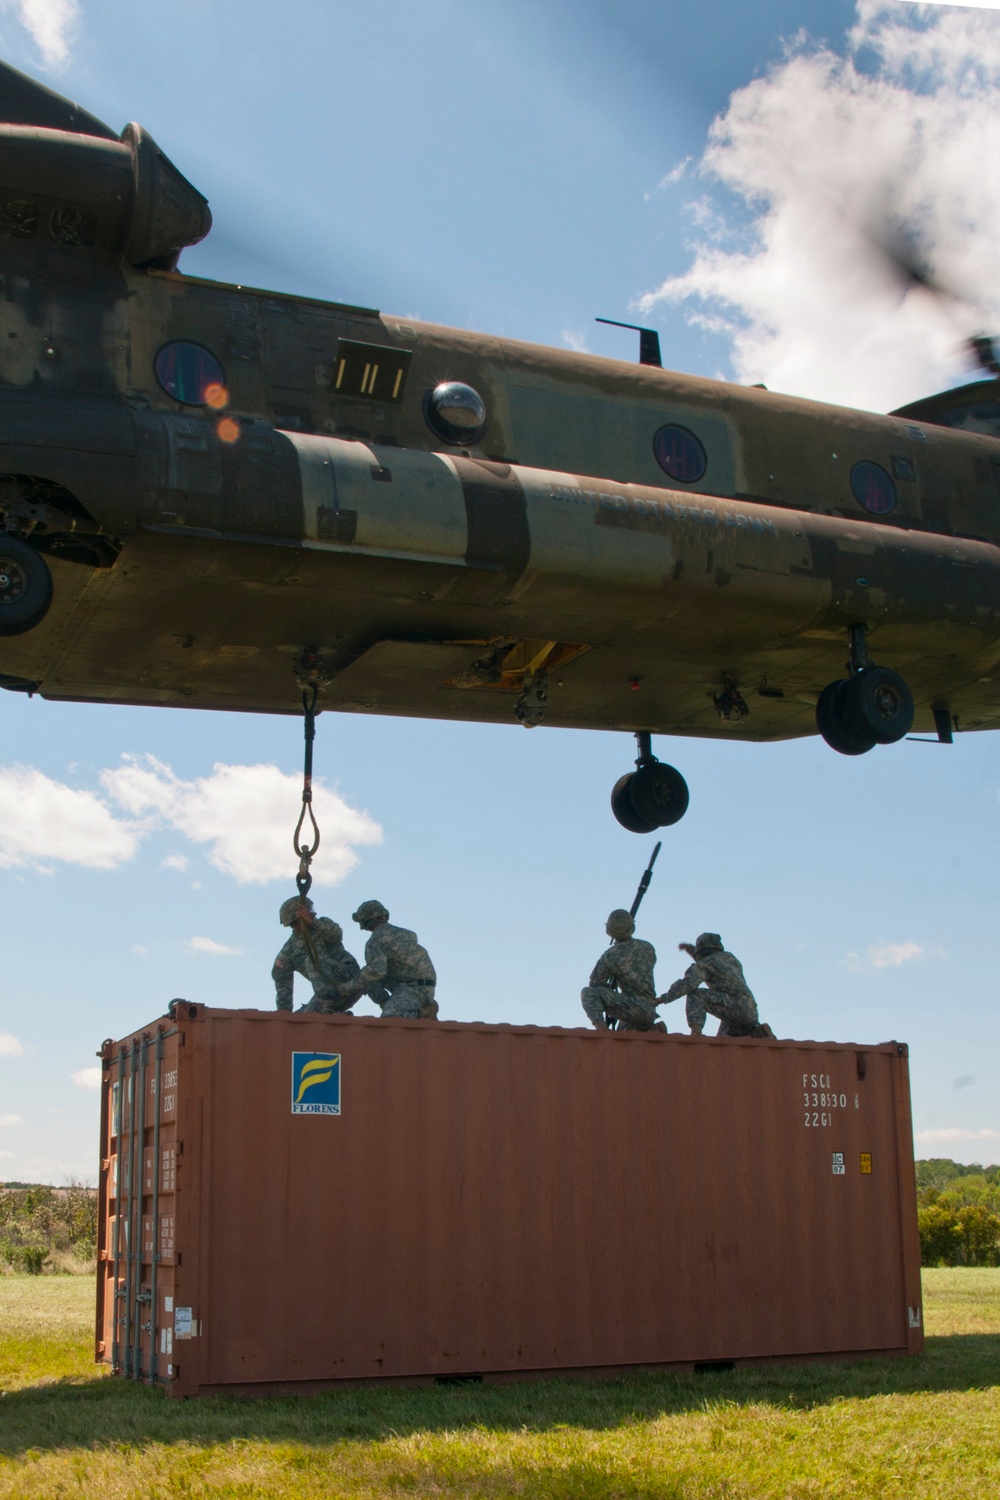 Sling load specialists get first live helo exercise